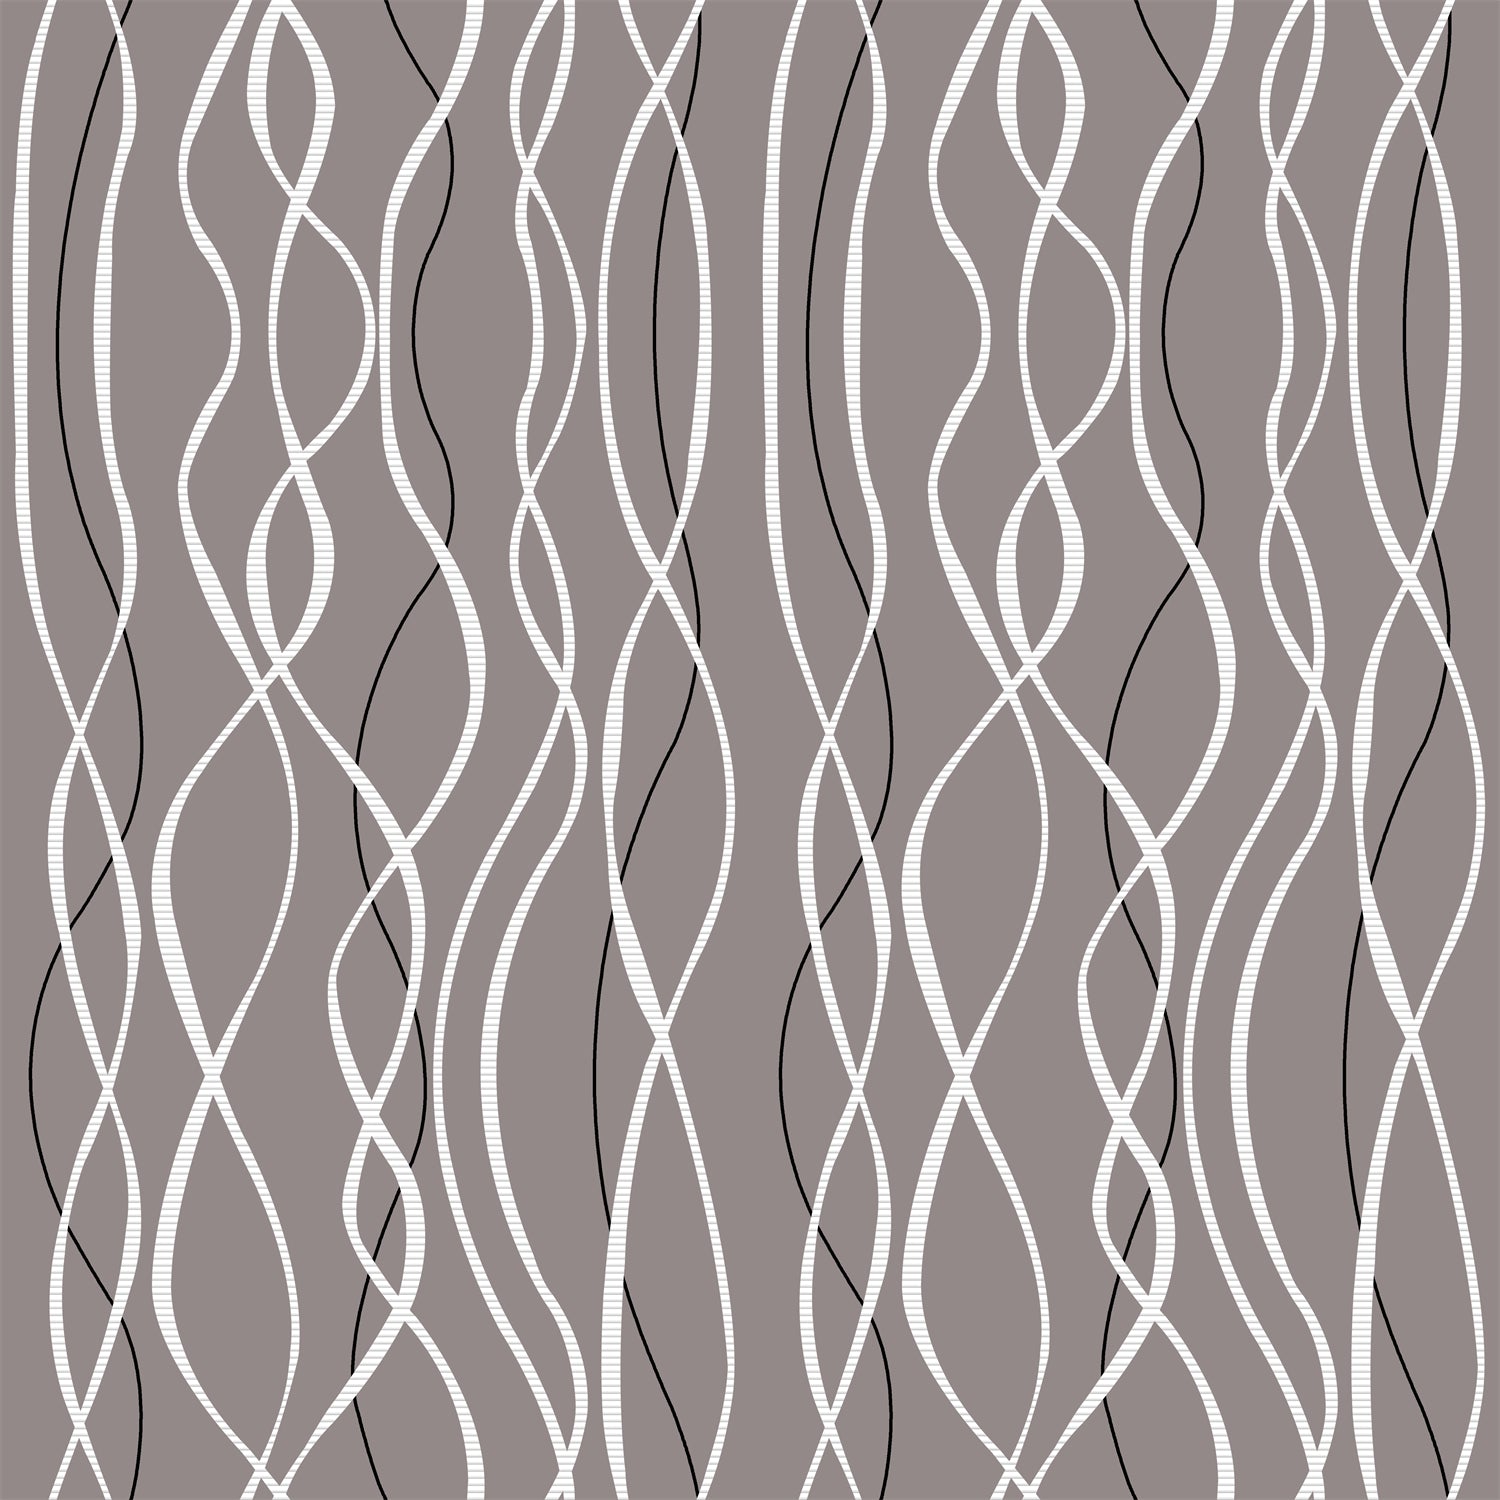 Print Grommet Blackout Grey Curtains For Living Room And Bedroom 2 Panels KGORGE Store